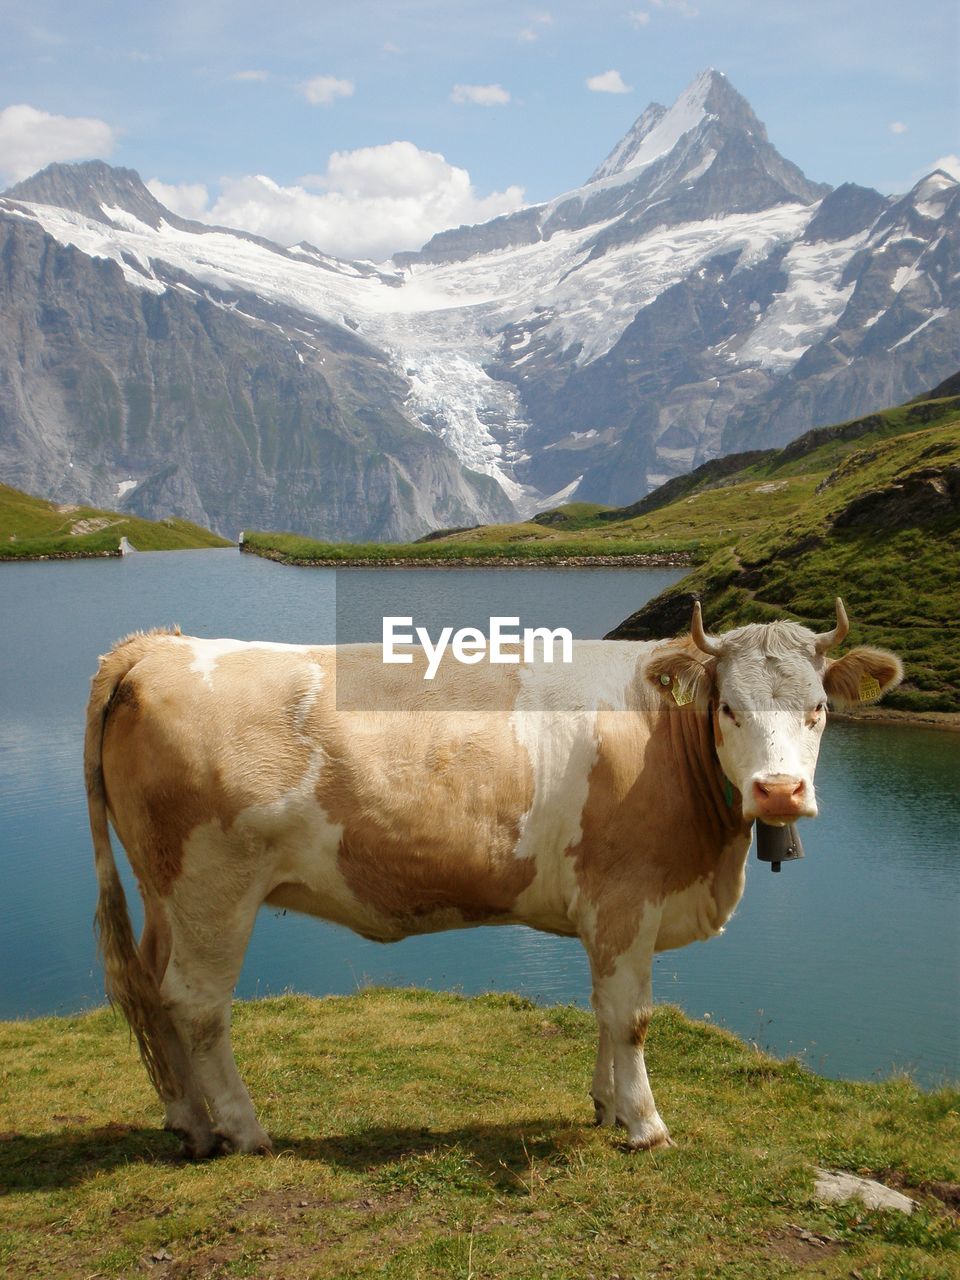 Cow on grassy field and the high mountains